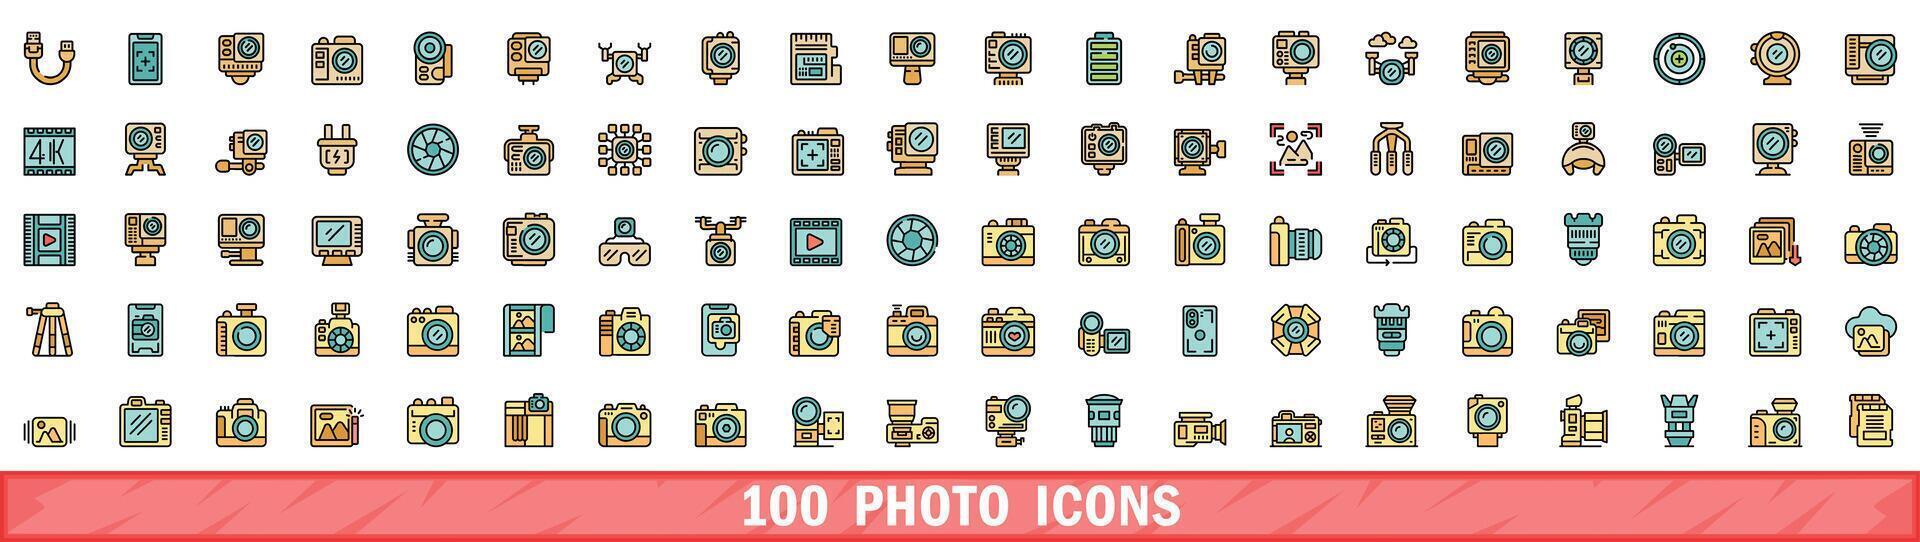 100 photo icons set, color line style vector